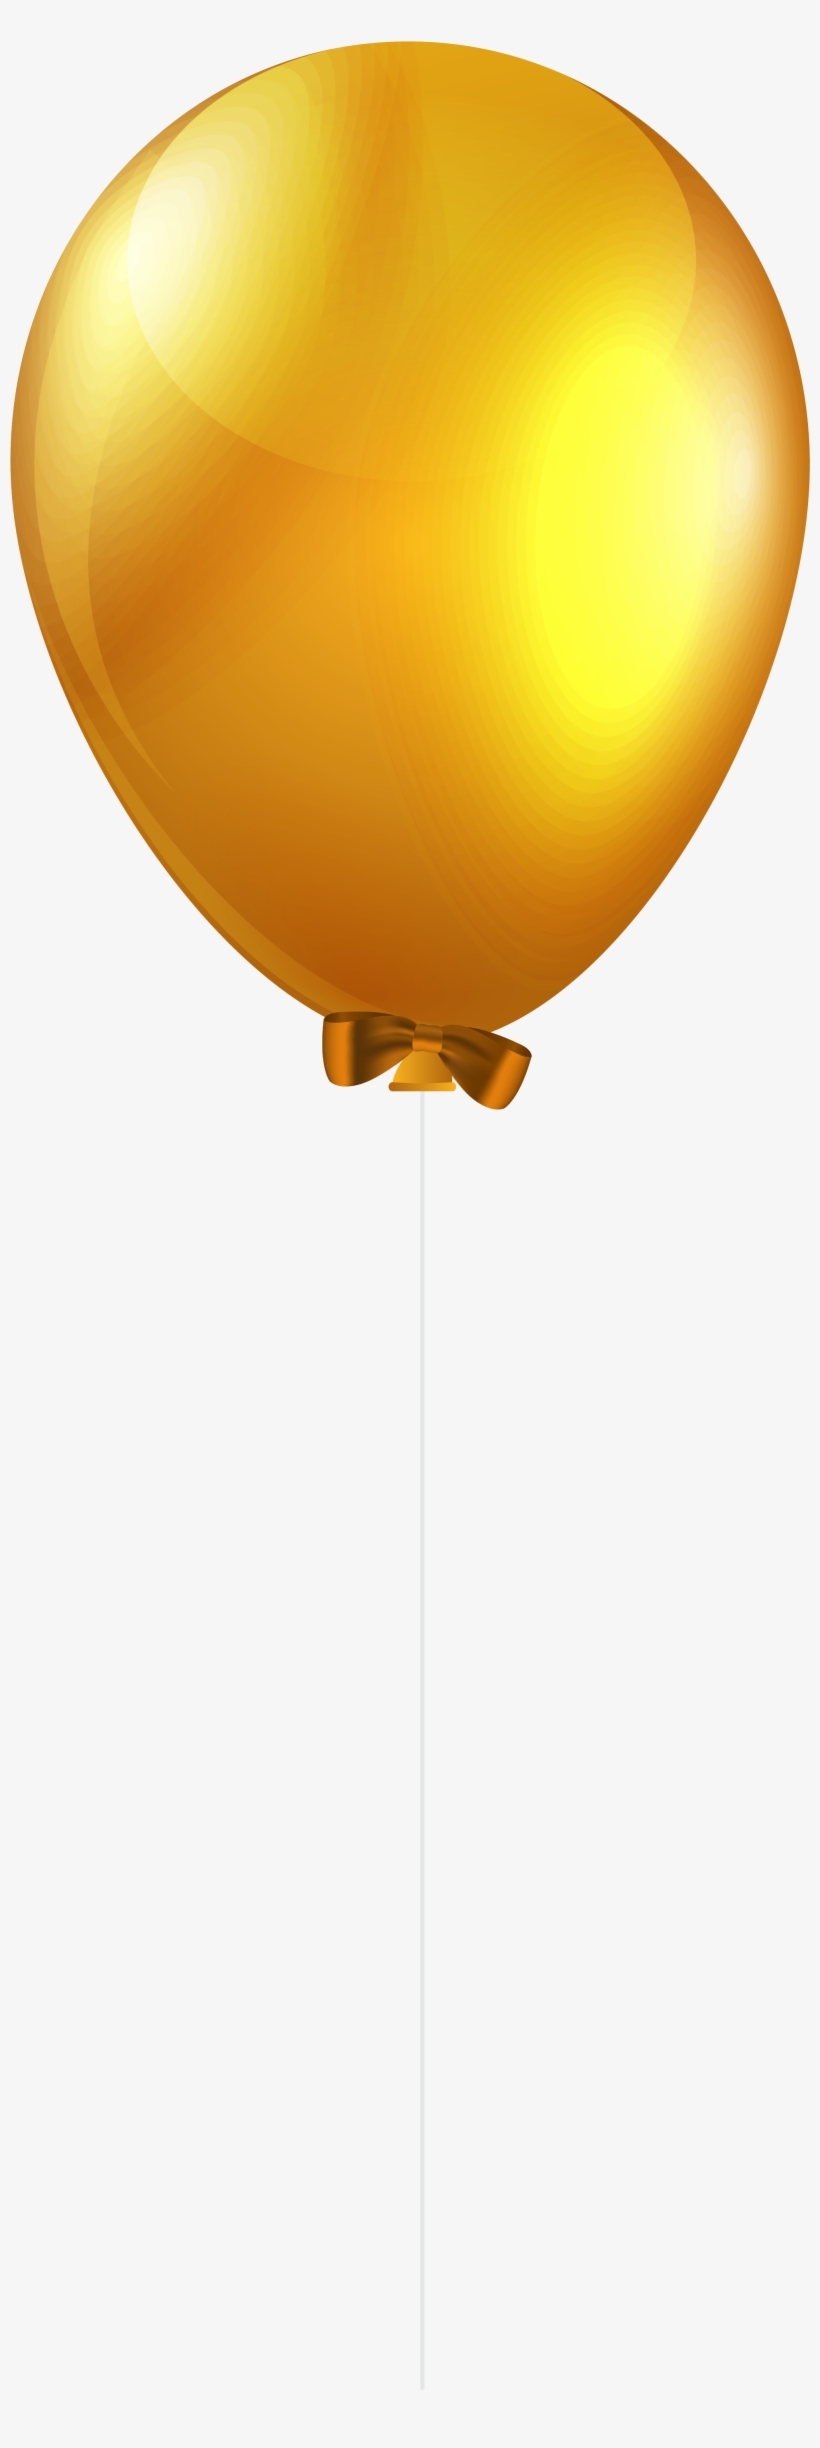 Single Balloon Image Png, transparent png #1276193